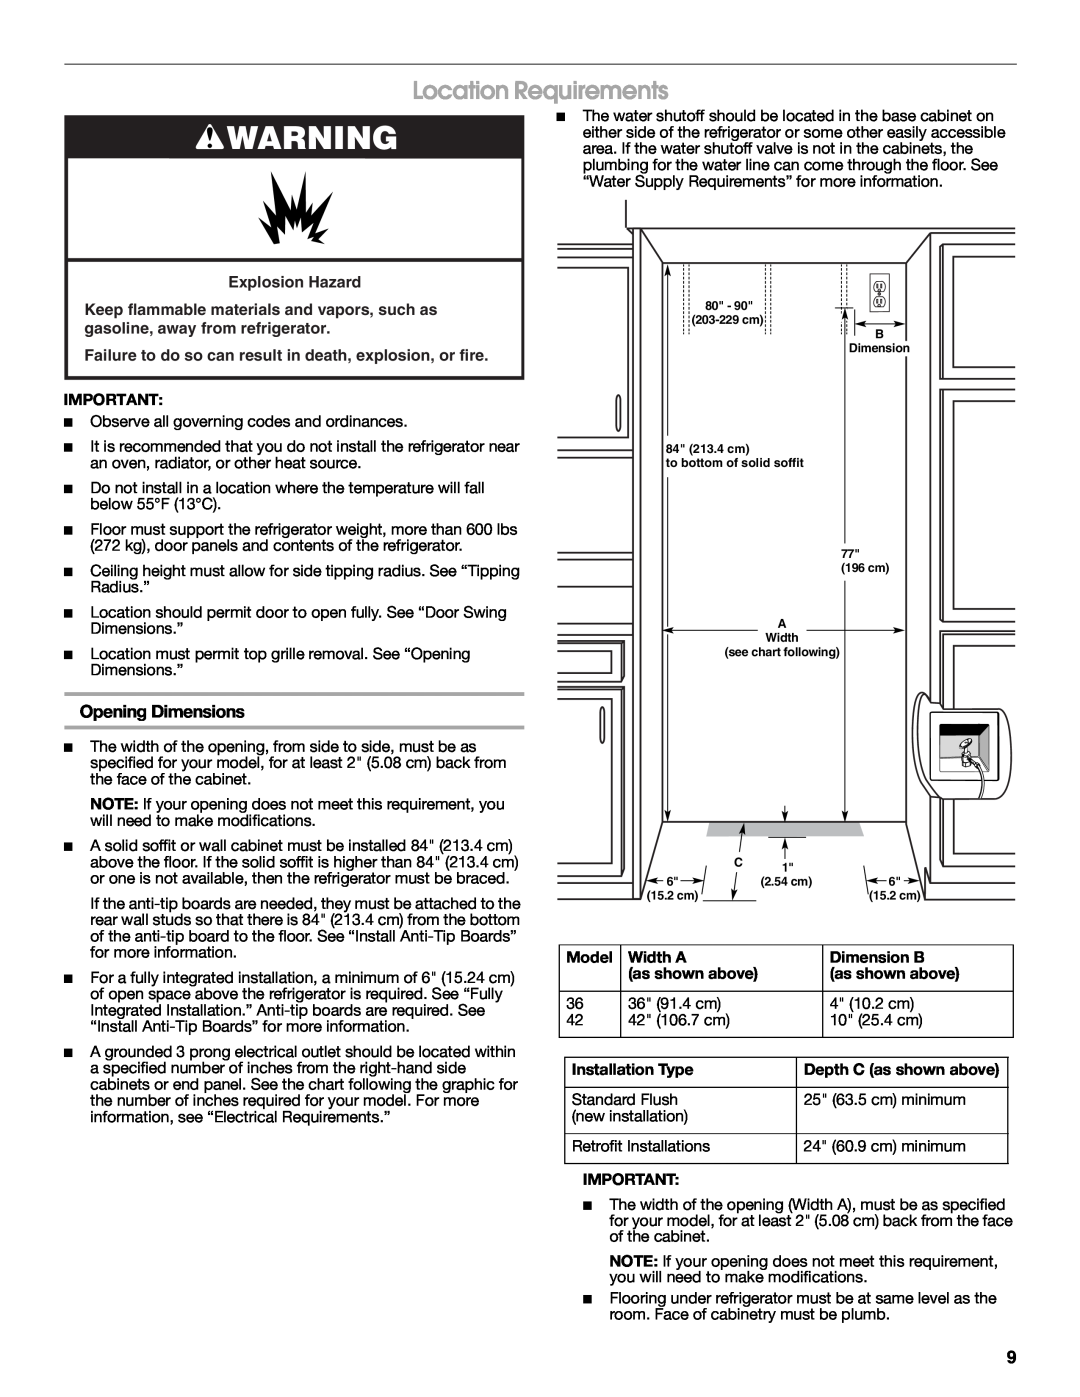 Jenn-Air W10379137A manual Location Requirements, Opening Dimensions 